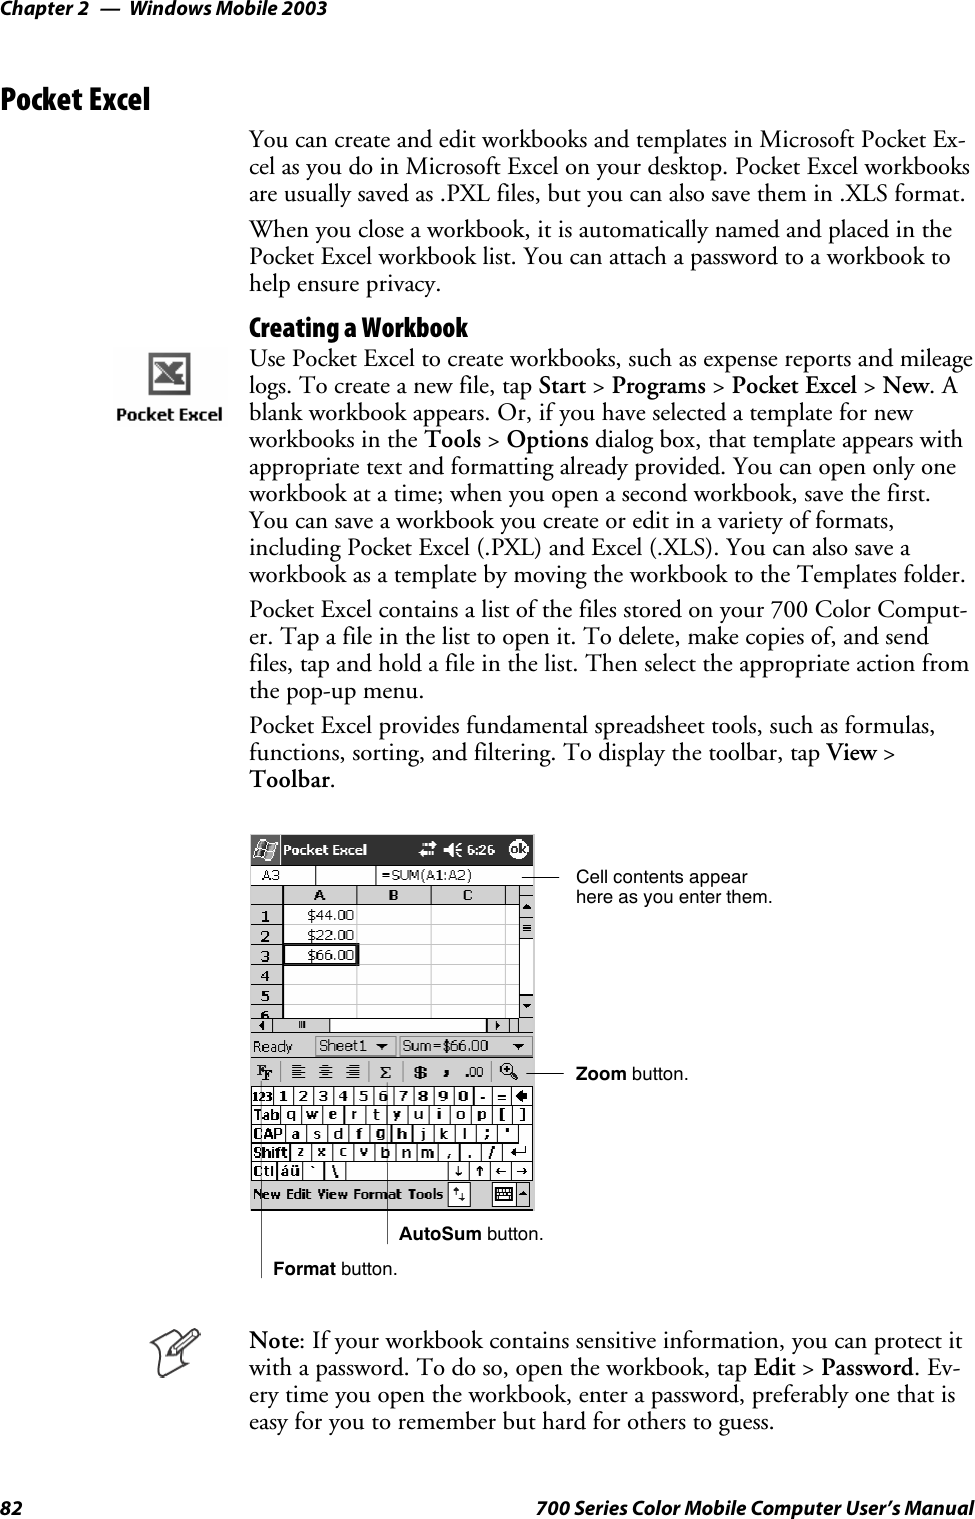 Windows Mobile 2003Chapter —282 700 Series Color Mobile Computer User’s ManualPocket ExcelYou can create and edit workbooks and templates in Microsoft Pocket Ex-cel as you do in Microsoft Excel on your desktop. Pocket Excel workbooksare usually saved as .PXL files, but you can also save them in .XLS format.When you close a workbook, it is automatically named and placed in thePocket Excel workbook list. You can attach a password to a workbook tohelp ensure privacy.Creating a WorkbookUse Pocket Excel to create workbooks, such as expense reports and mileagelogs. To create a new file, tap Start &gt;Programs &gt;Pocket Excel &gt;New.Ablank workbook appears. Or, if you have selected a template for newworkbooks in the Tools &gt;Options dialog box, that template appears withappropriate text and formatting already provided. You can open only oneworkbook at a time; when you open a second workbook, save the first.You can save a workbook you create or edit in a variety of formats,including Pocket Excel (.PXL) and Excel (.XLS). You can also save aworkbook as a template by moving the workbook to the Templates folder.Pocket Excel contains a list of the files stored on your 700 Color Comput-er. Tap a file in the list to open it. To delete, make copies of, and sendfiles, tap and hold a file in the list. Then select the appropriate action fromthe pop-up menu.Pocket Excel provides fundamental spreadsheet tools, such as formulas,functions, sorting, and filtering. To display the toolbar, tap View &gt;Toolbar.Zoom button.Format button.AutoSum button.Cell contents appearhere as you enter them.Note: If your workbook contains sensitive information, you can protect itwith a password. To do so, open the workbook, tap Edit &gt;Password.Ev-ery time you open the workbook, enter a password, preferably one that iseasy for you to remember but hard for others to guess.